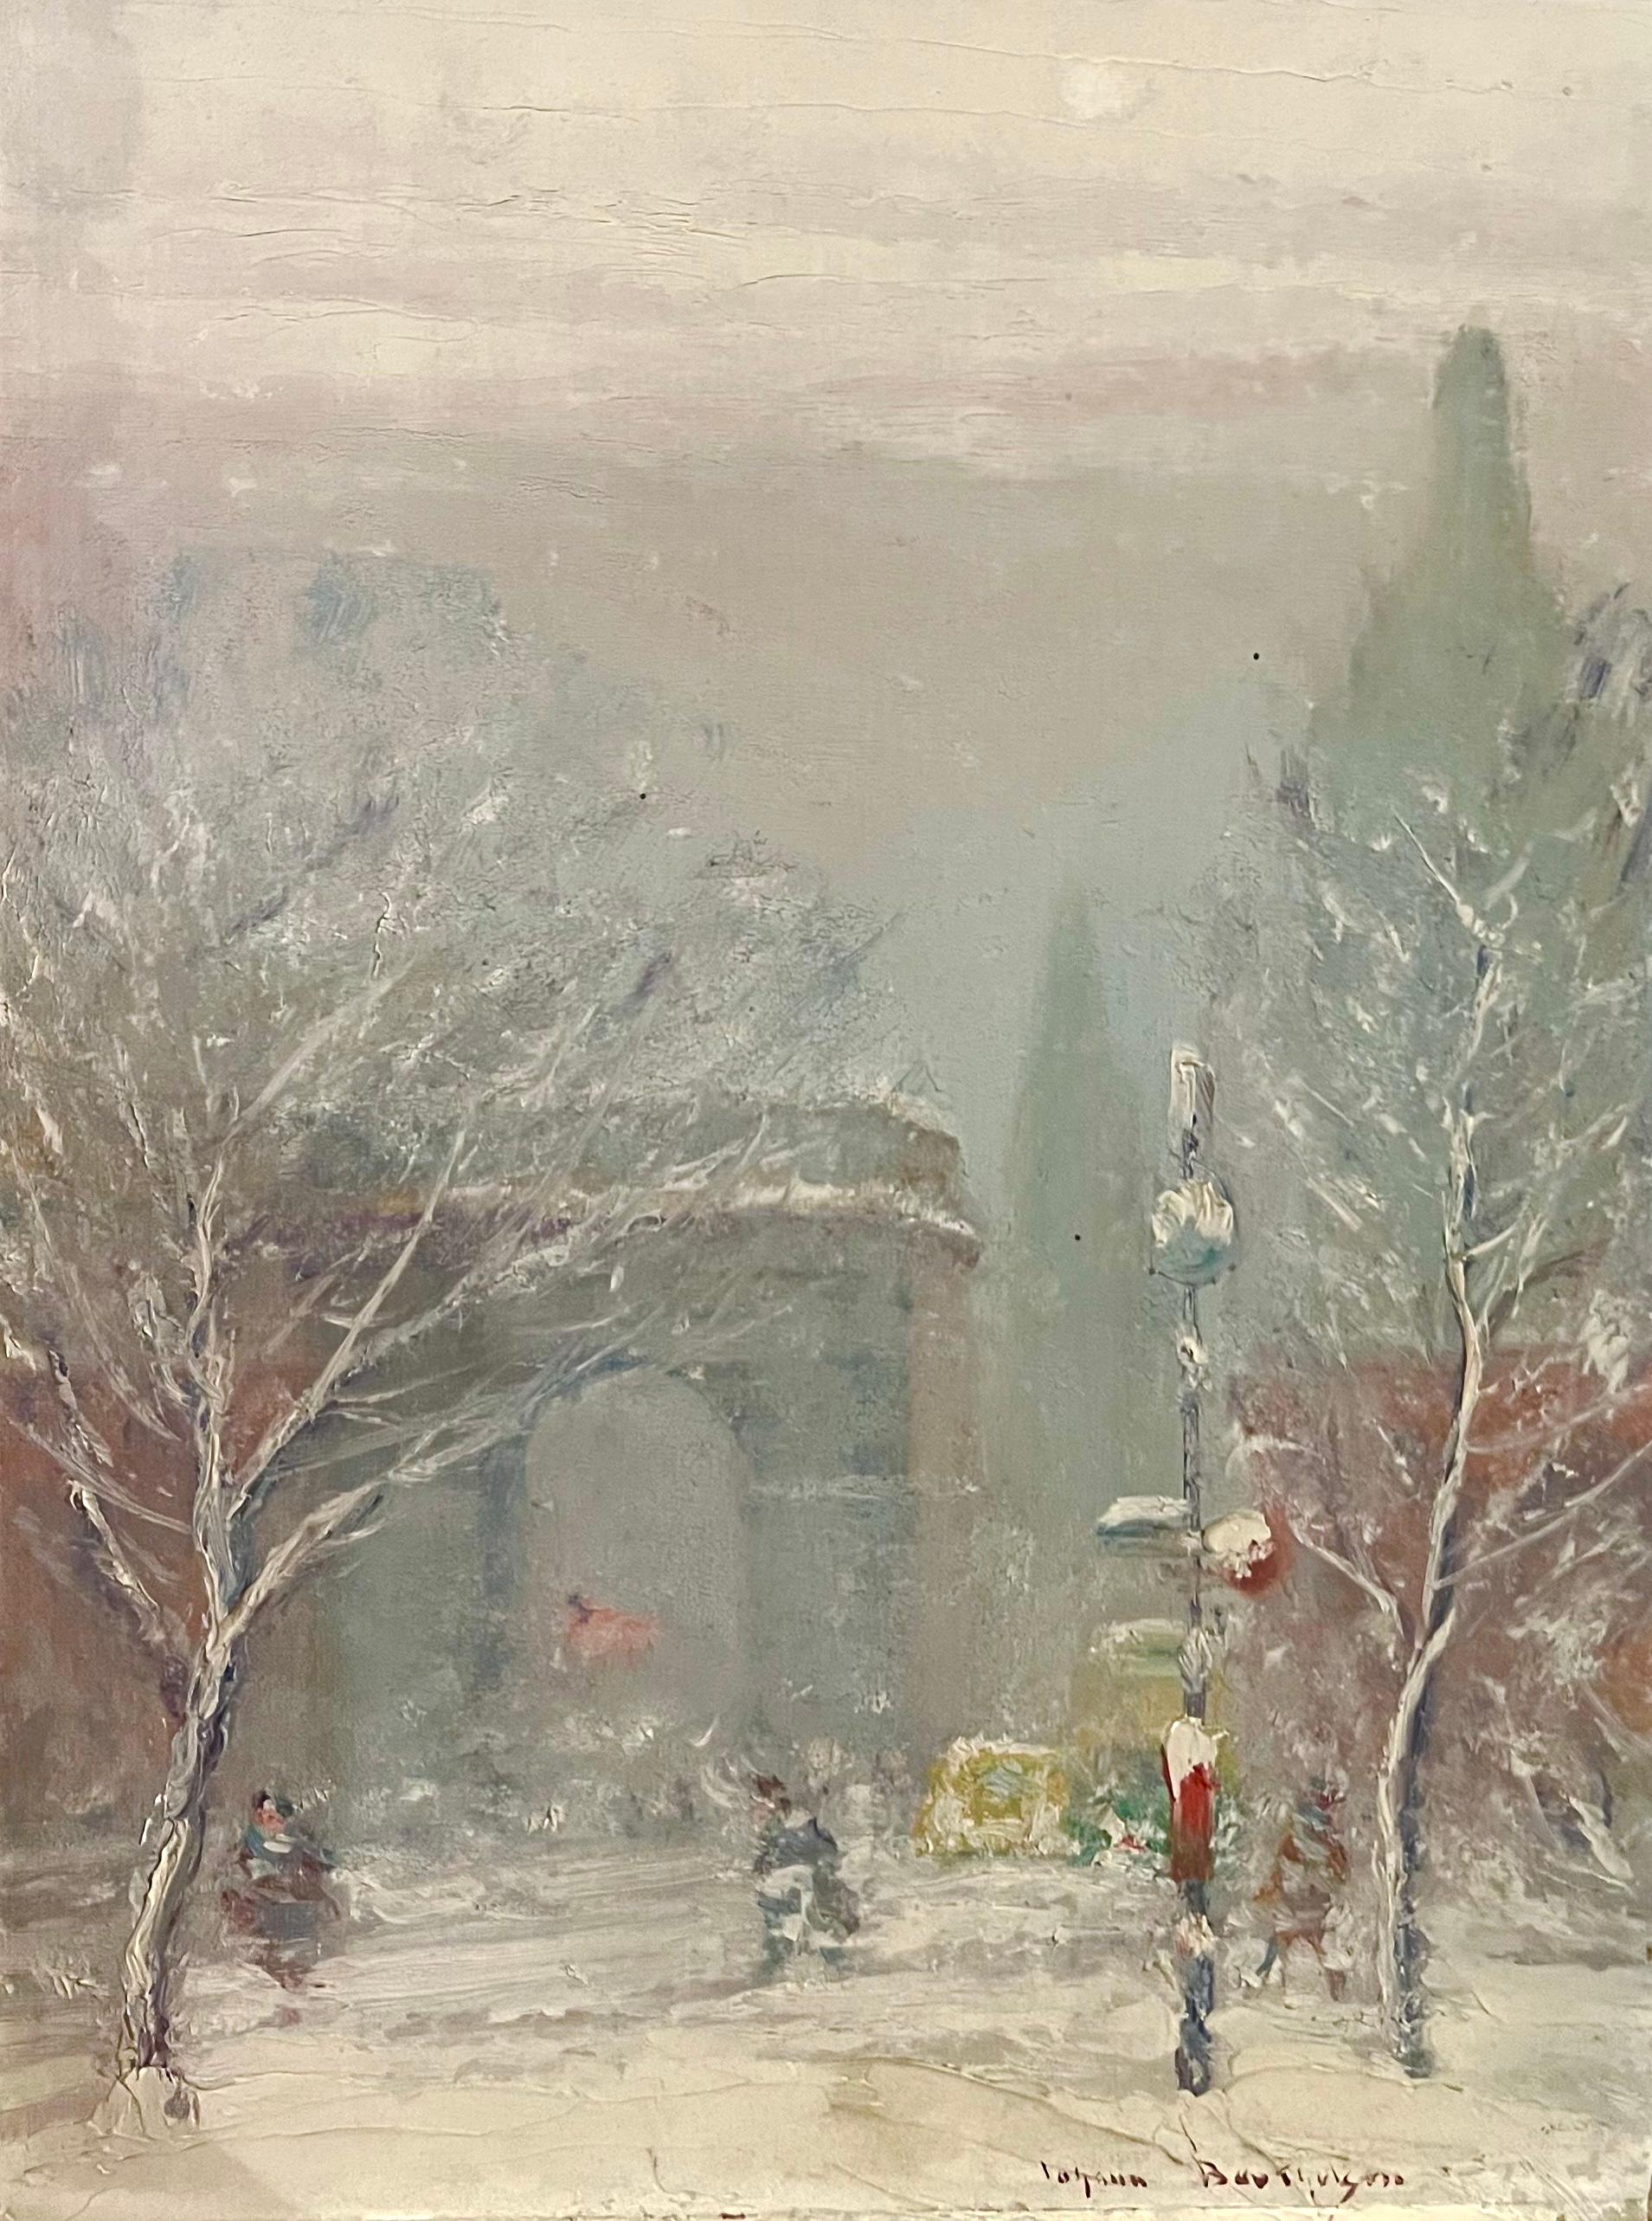 Johann Berthelsen Landscape Painting - American Impressionist “WASHINGTON SQUARE PARK” with Figures and Cars